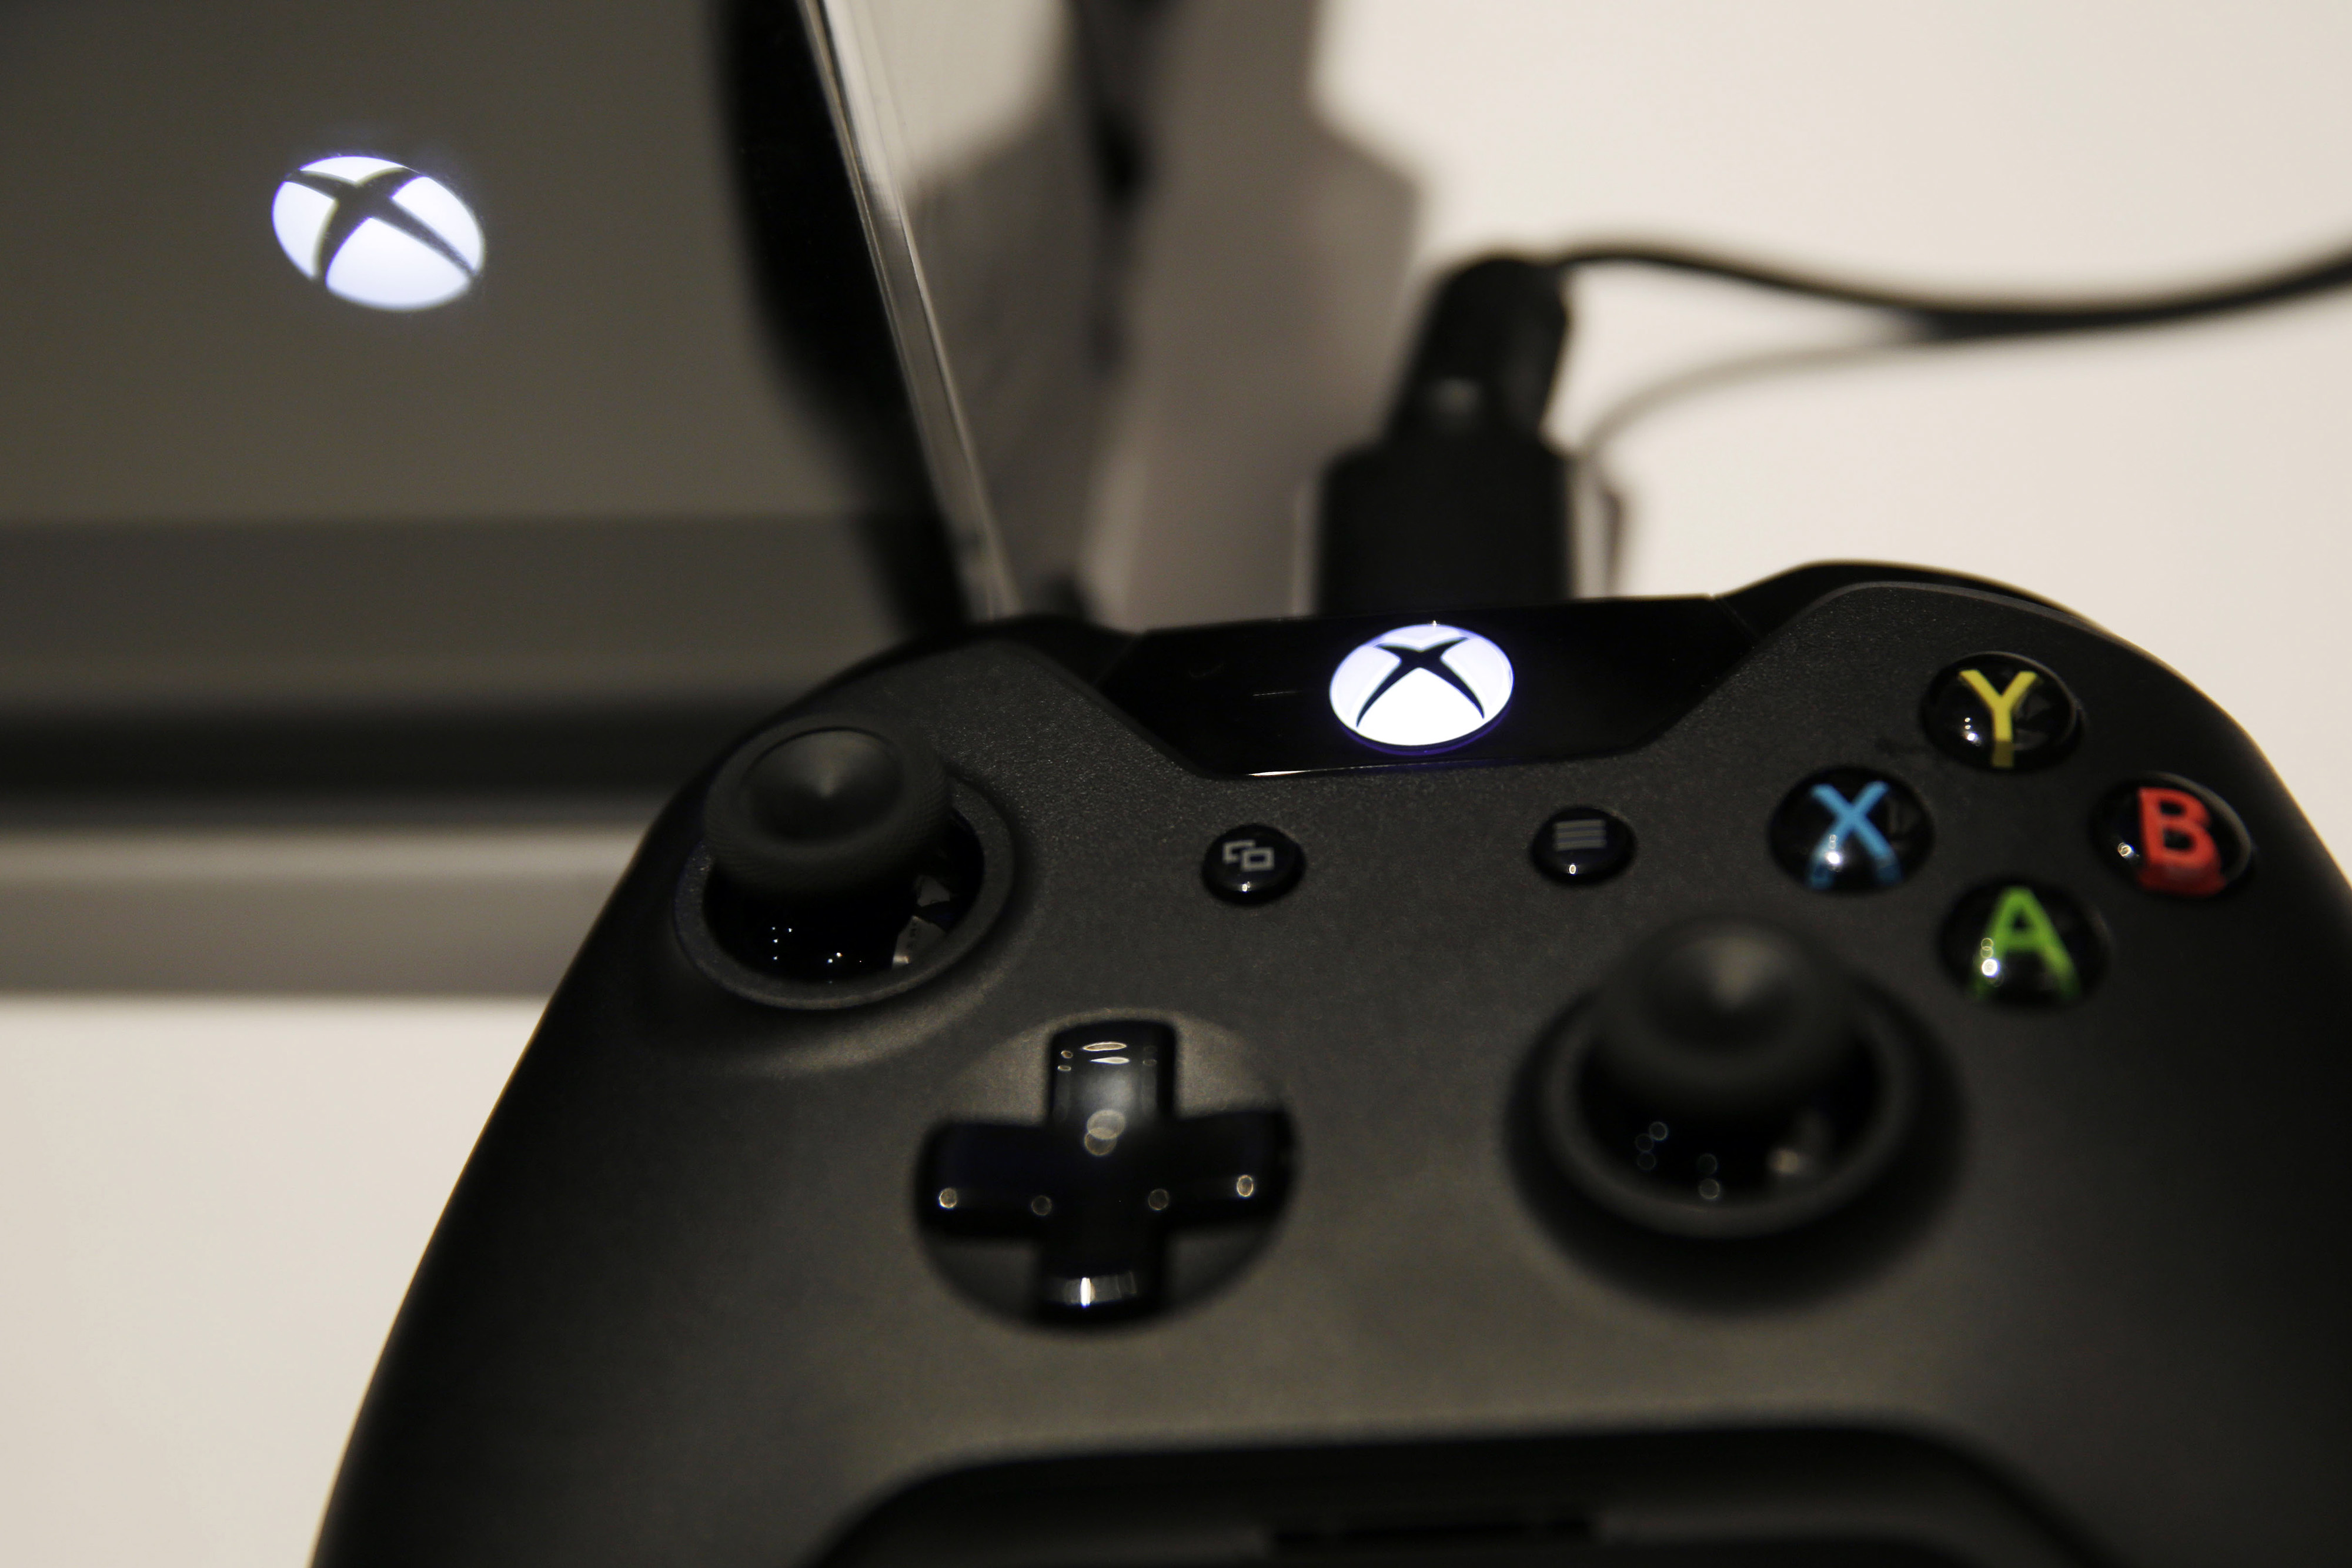 A logo sits on an Xbox One games controller during the Eurogamer Expo 2013 in London, U.K., on Saturday, Sept. 28, 2013. (Matthew Lloyd—Bloomberg / Getty Images)